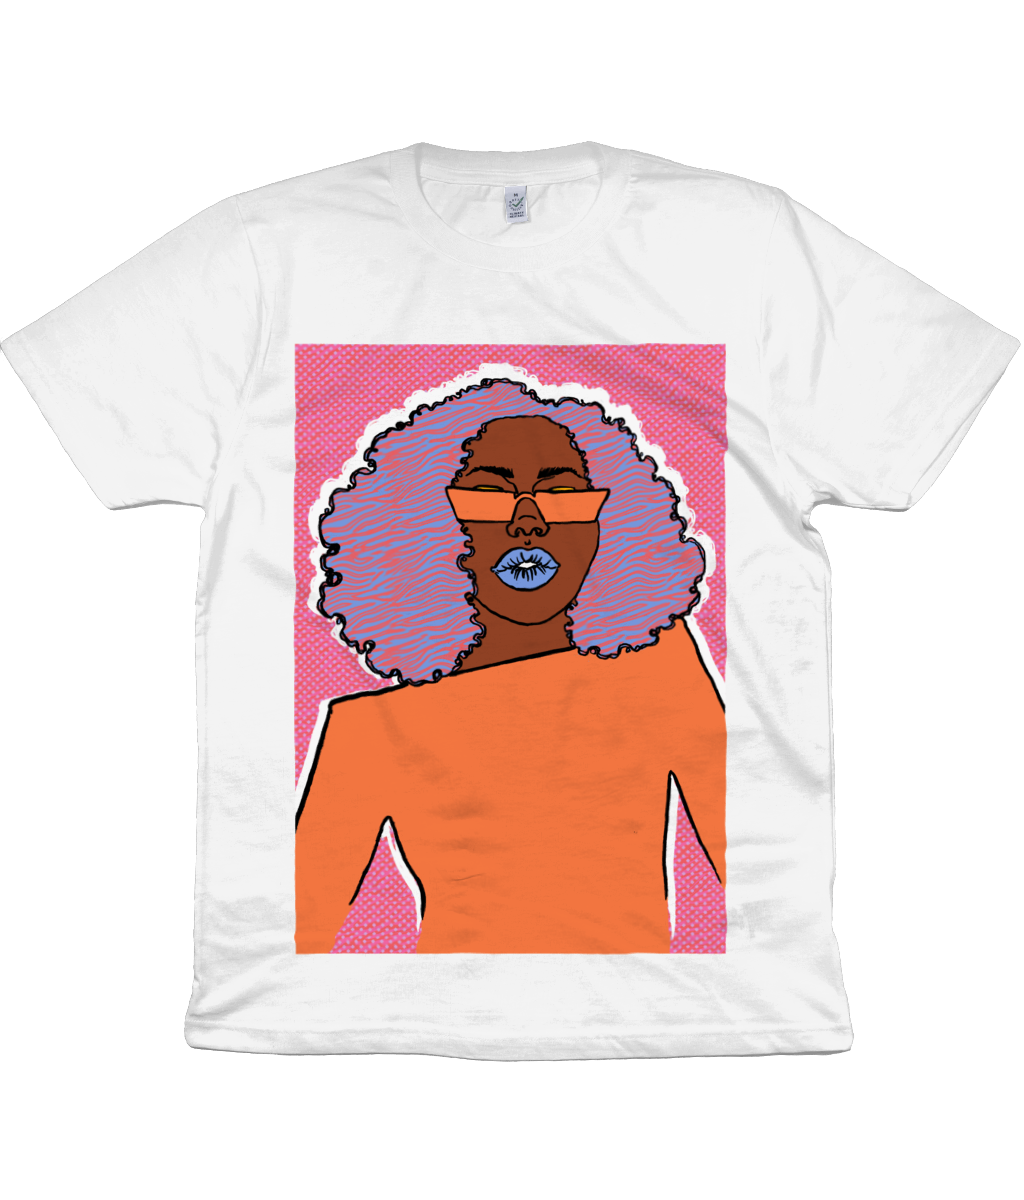 White t-shirt with illustration of black woman in orange and pink by dorcascreates